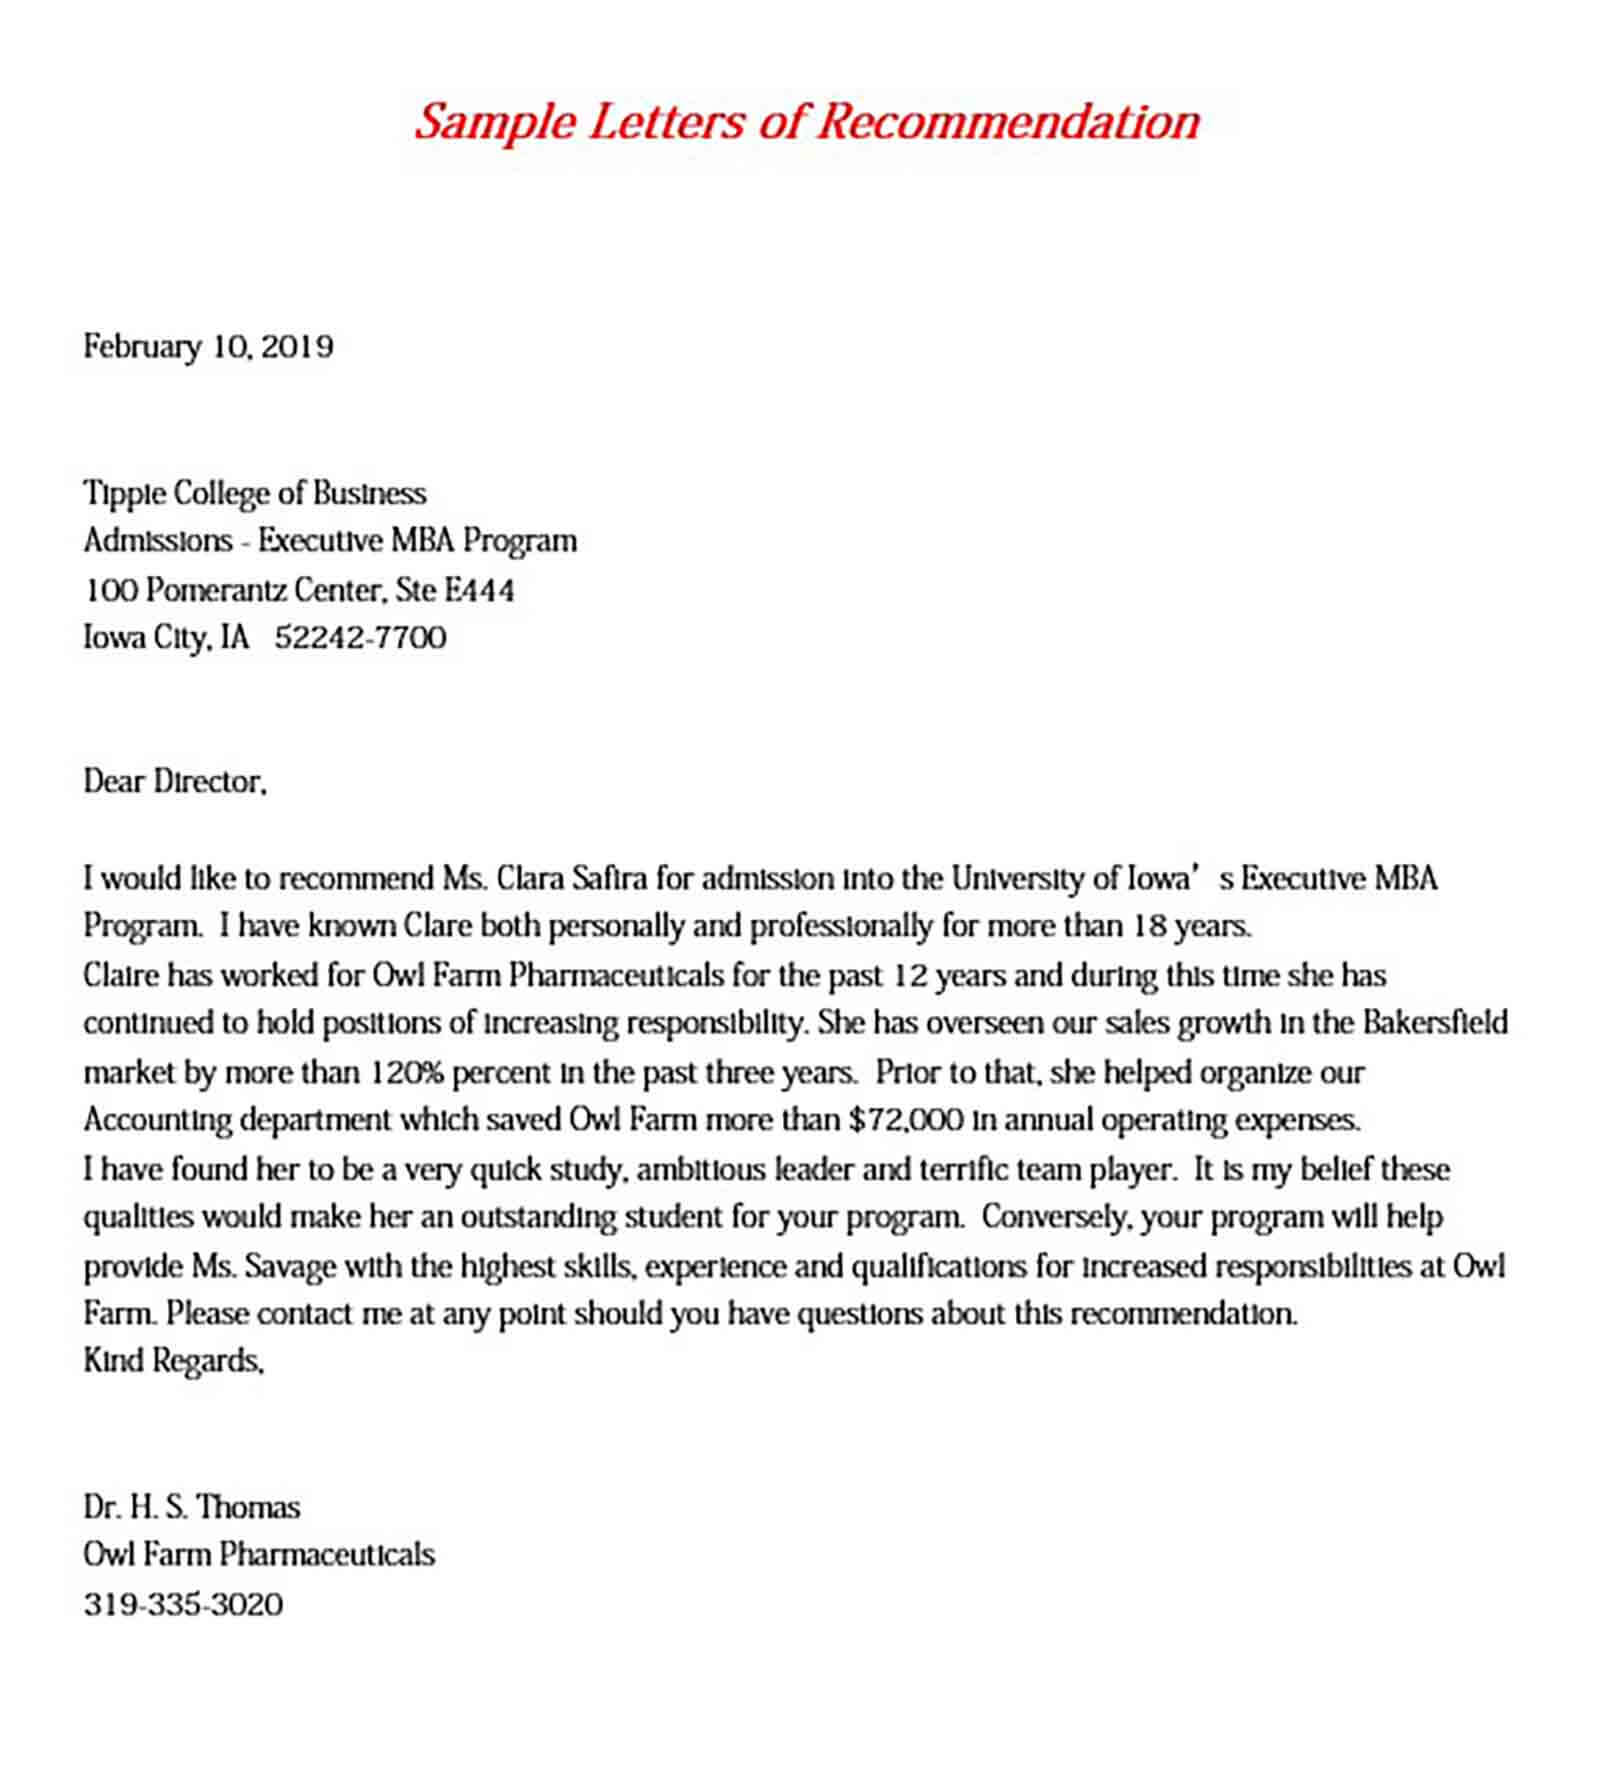 How to write an application letter recommendation